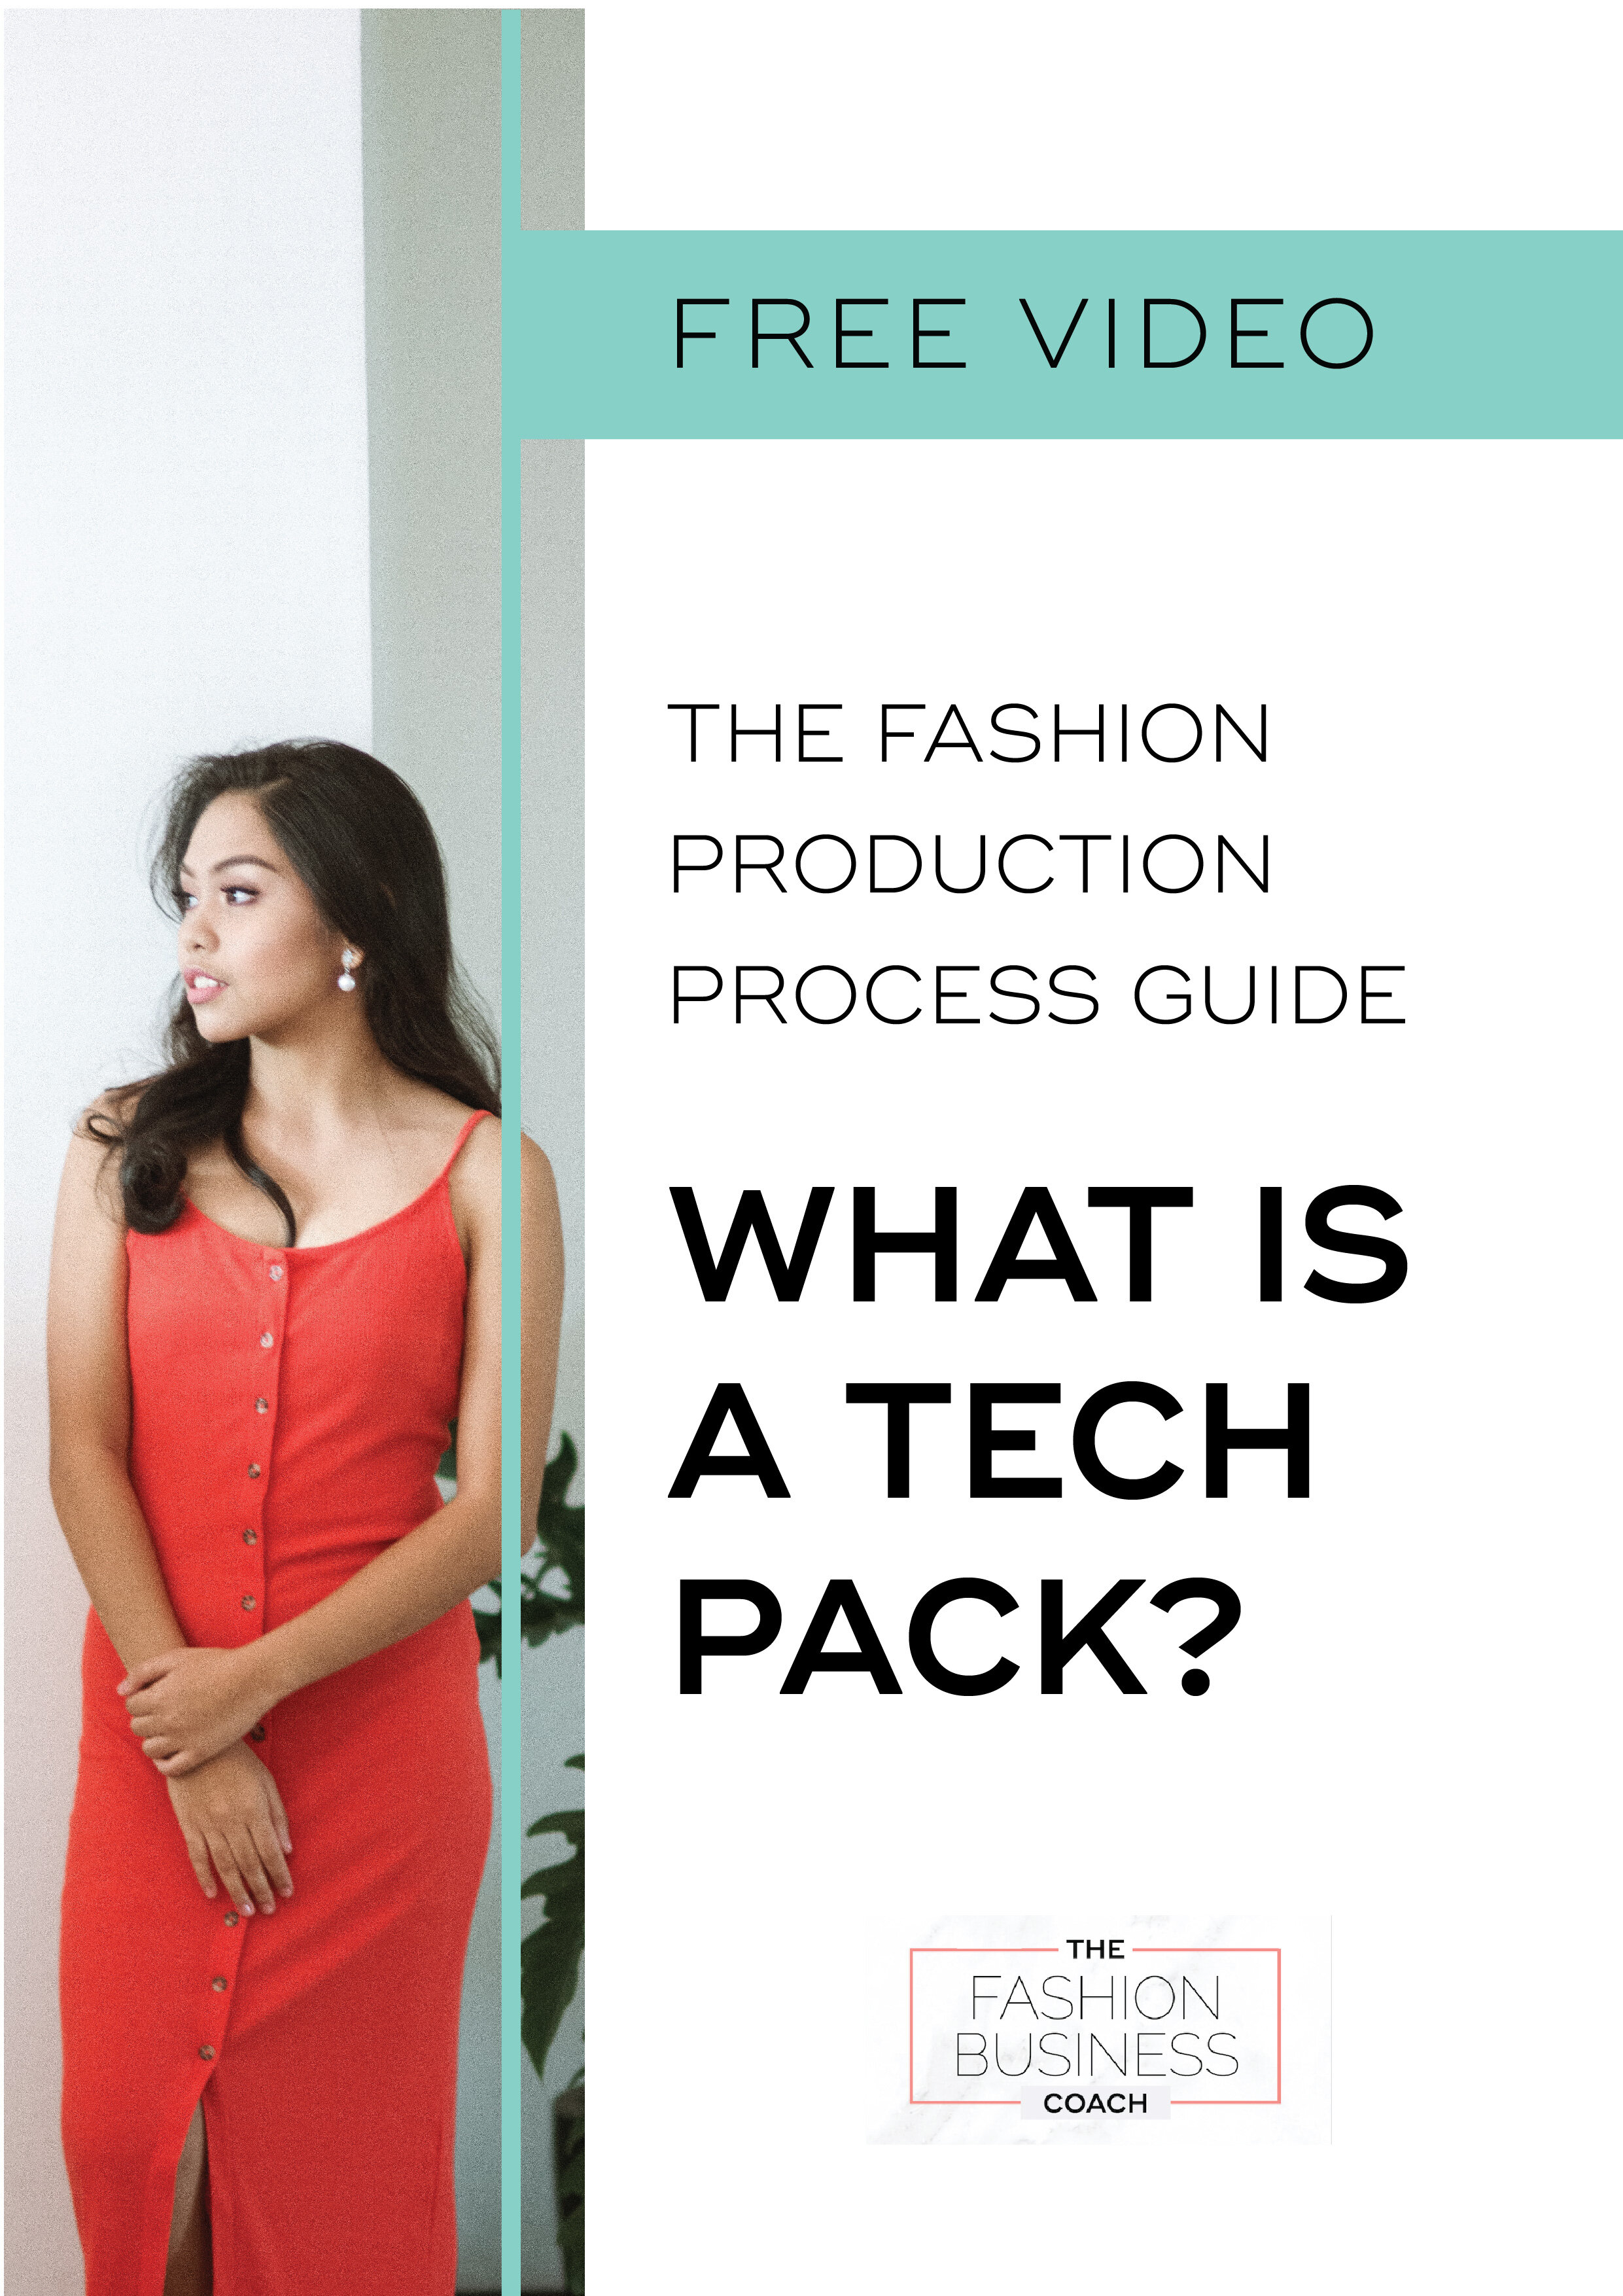 The Fashion Production Process Guide What is a tech pack video copy.jpg